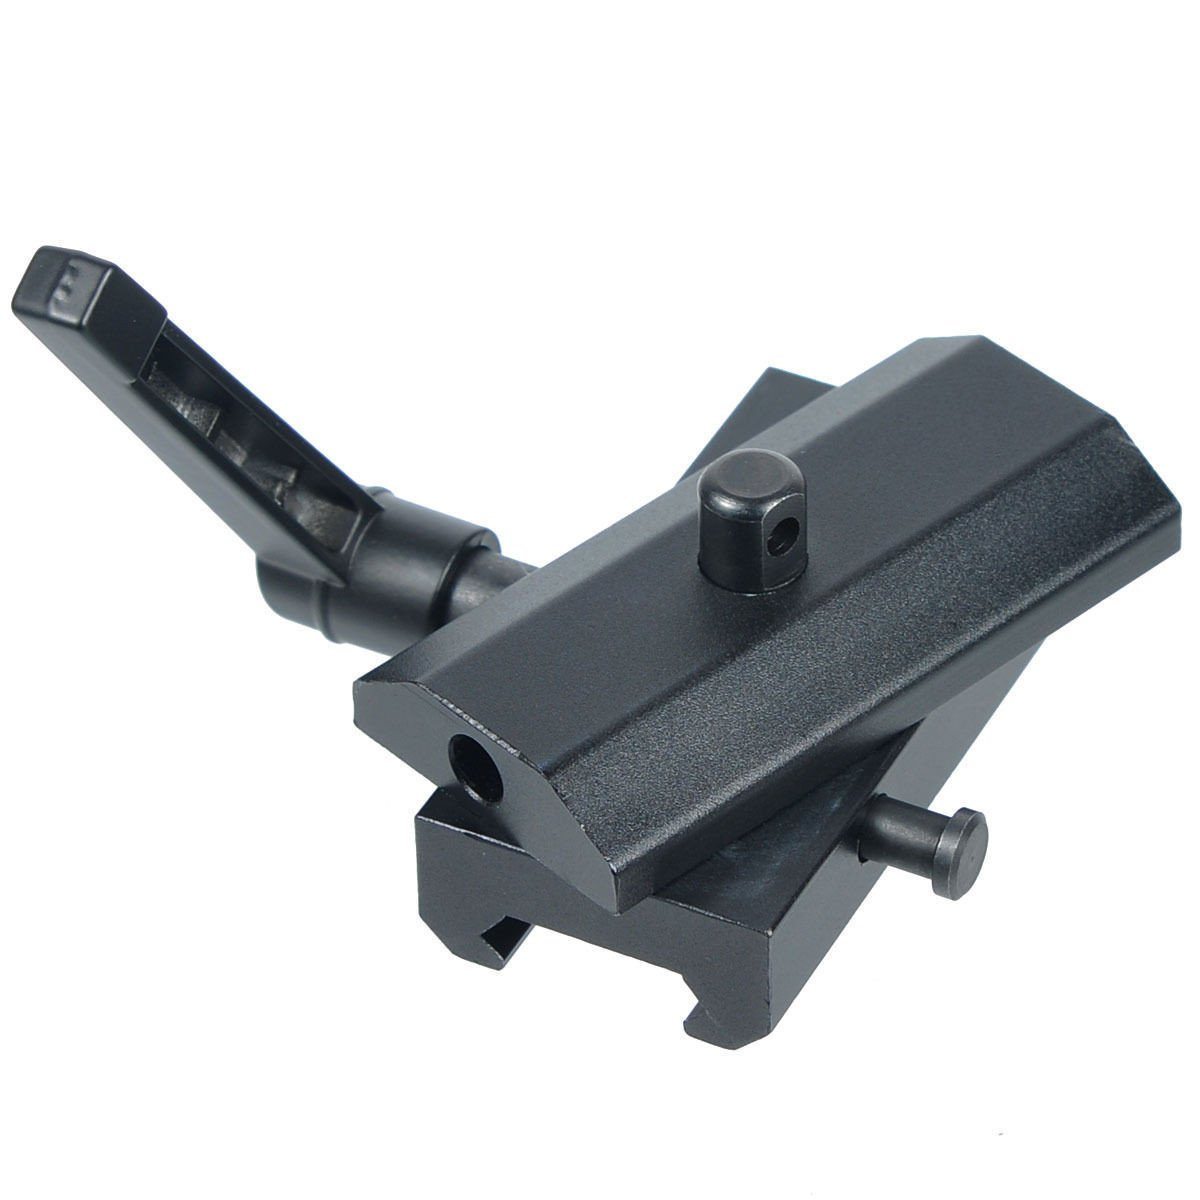 Rotating Quick Detachable Bipod Adapter for Picatinny Rails Bipods &amp; Monopods Unbranded 